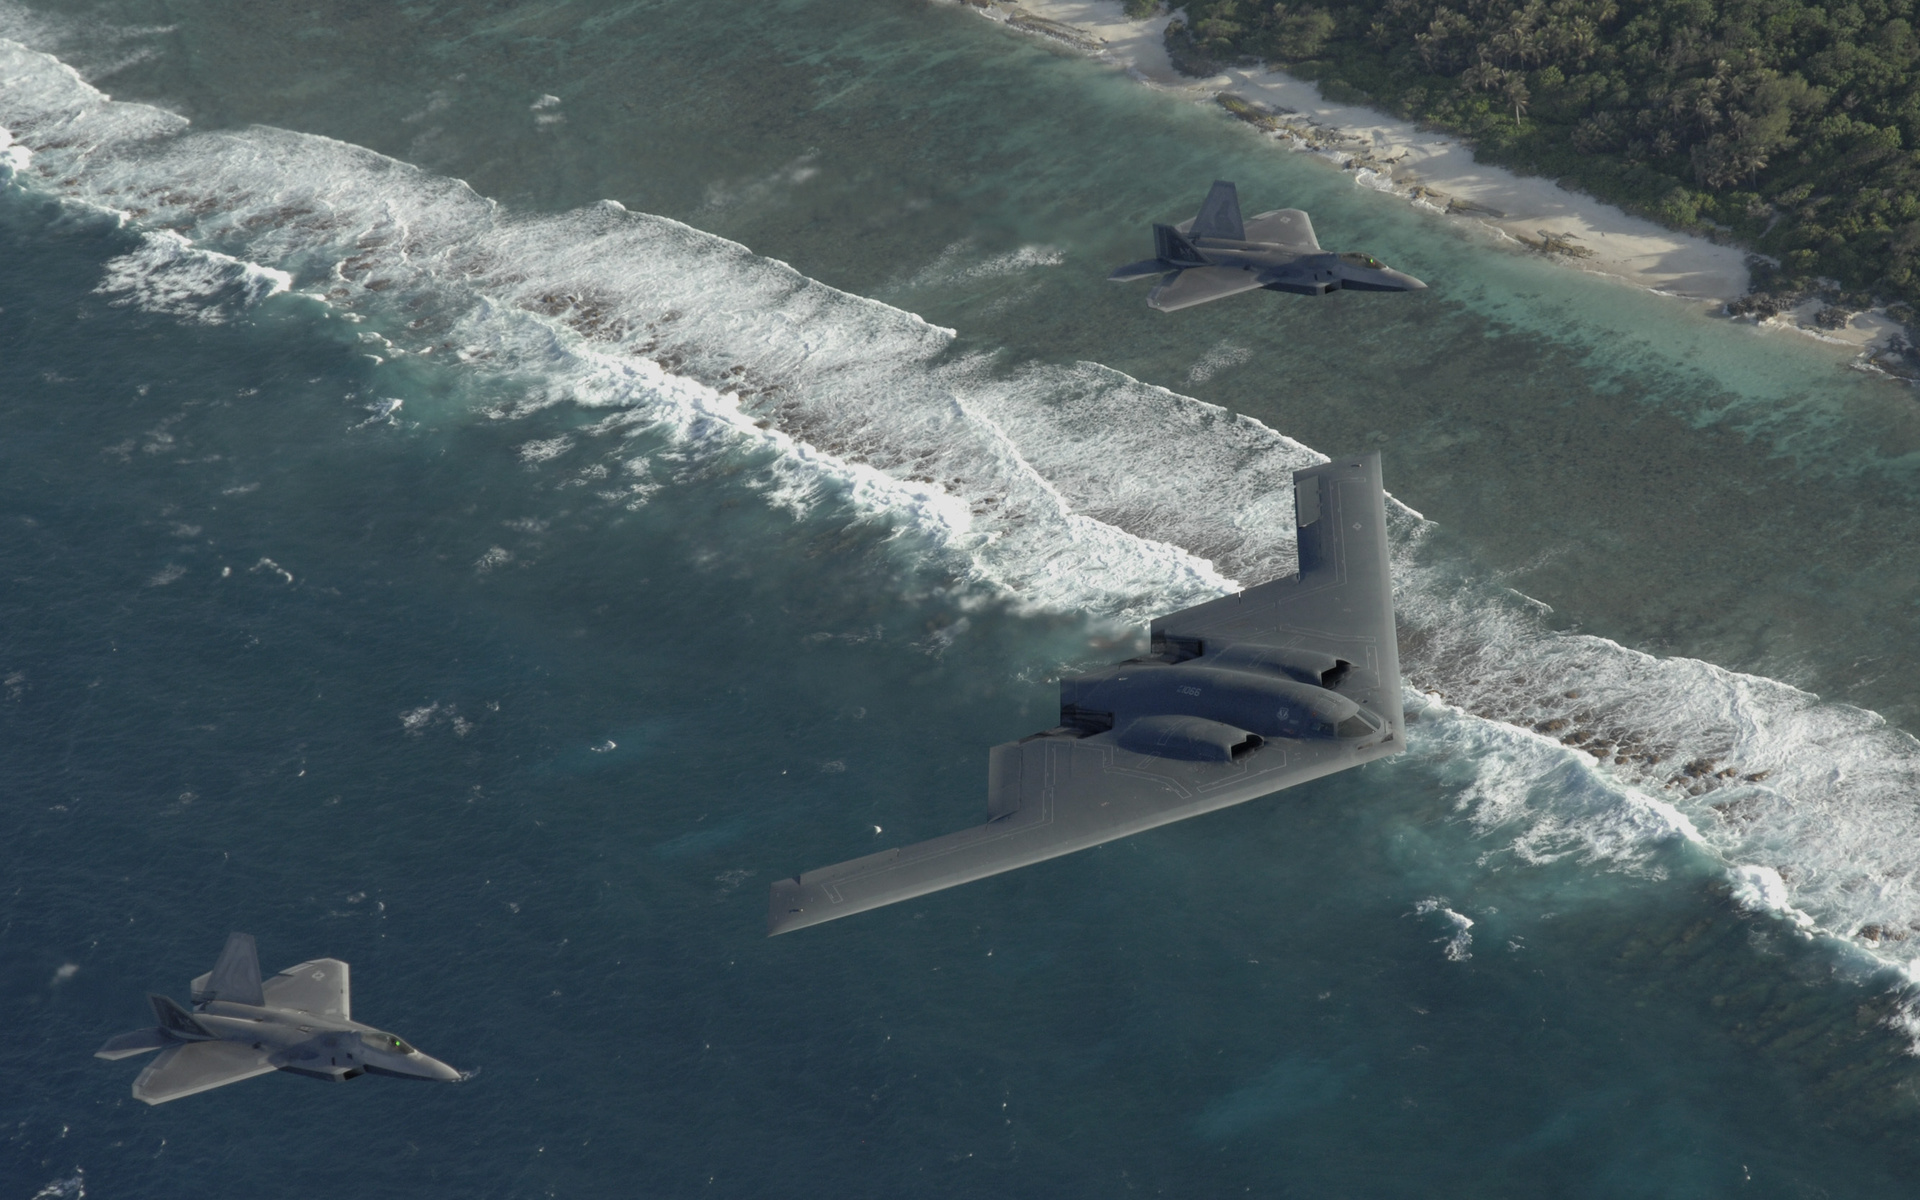 Two f22, b-2, pacific ocean